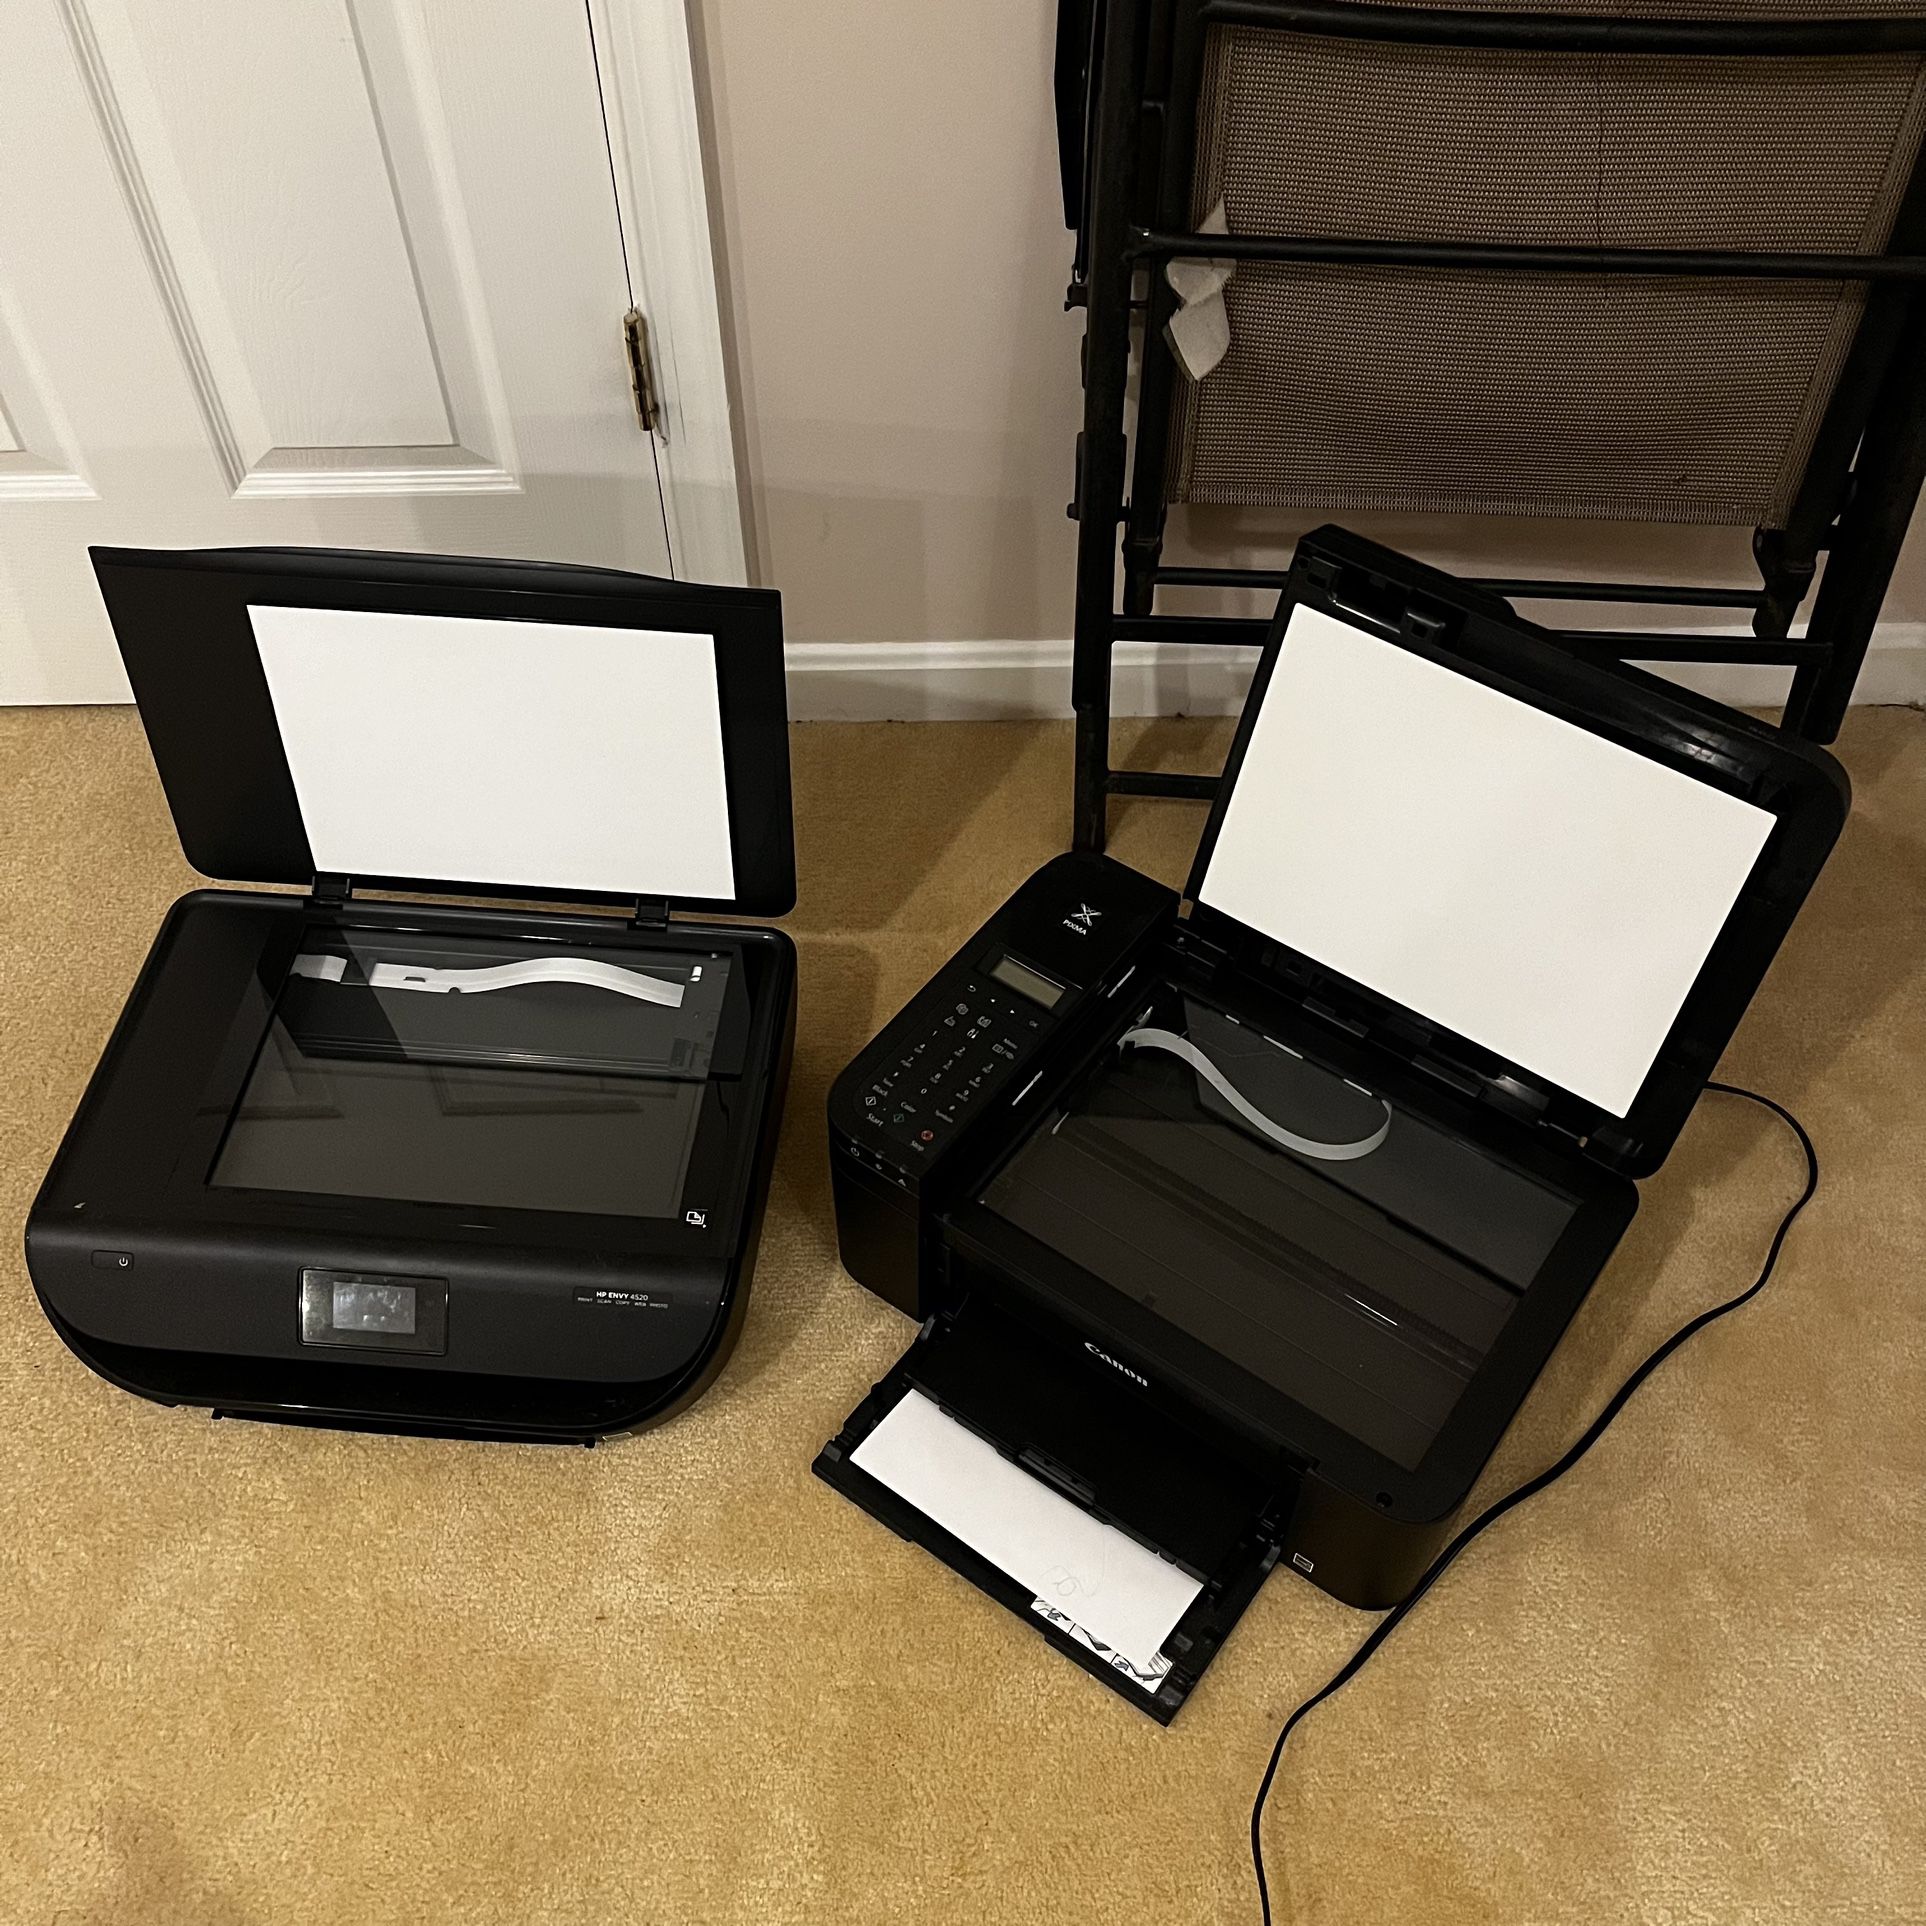 Printers 2 For 1 deal